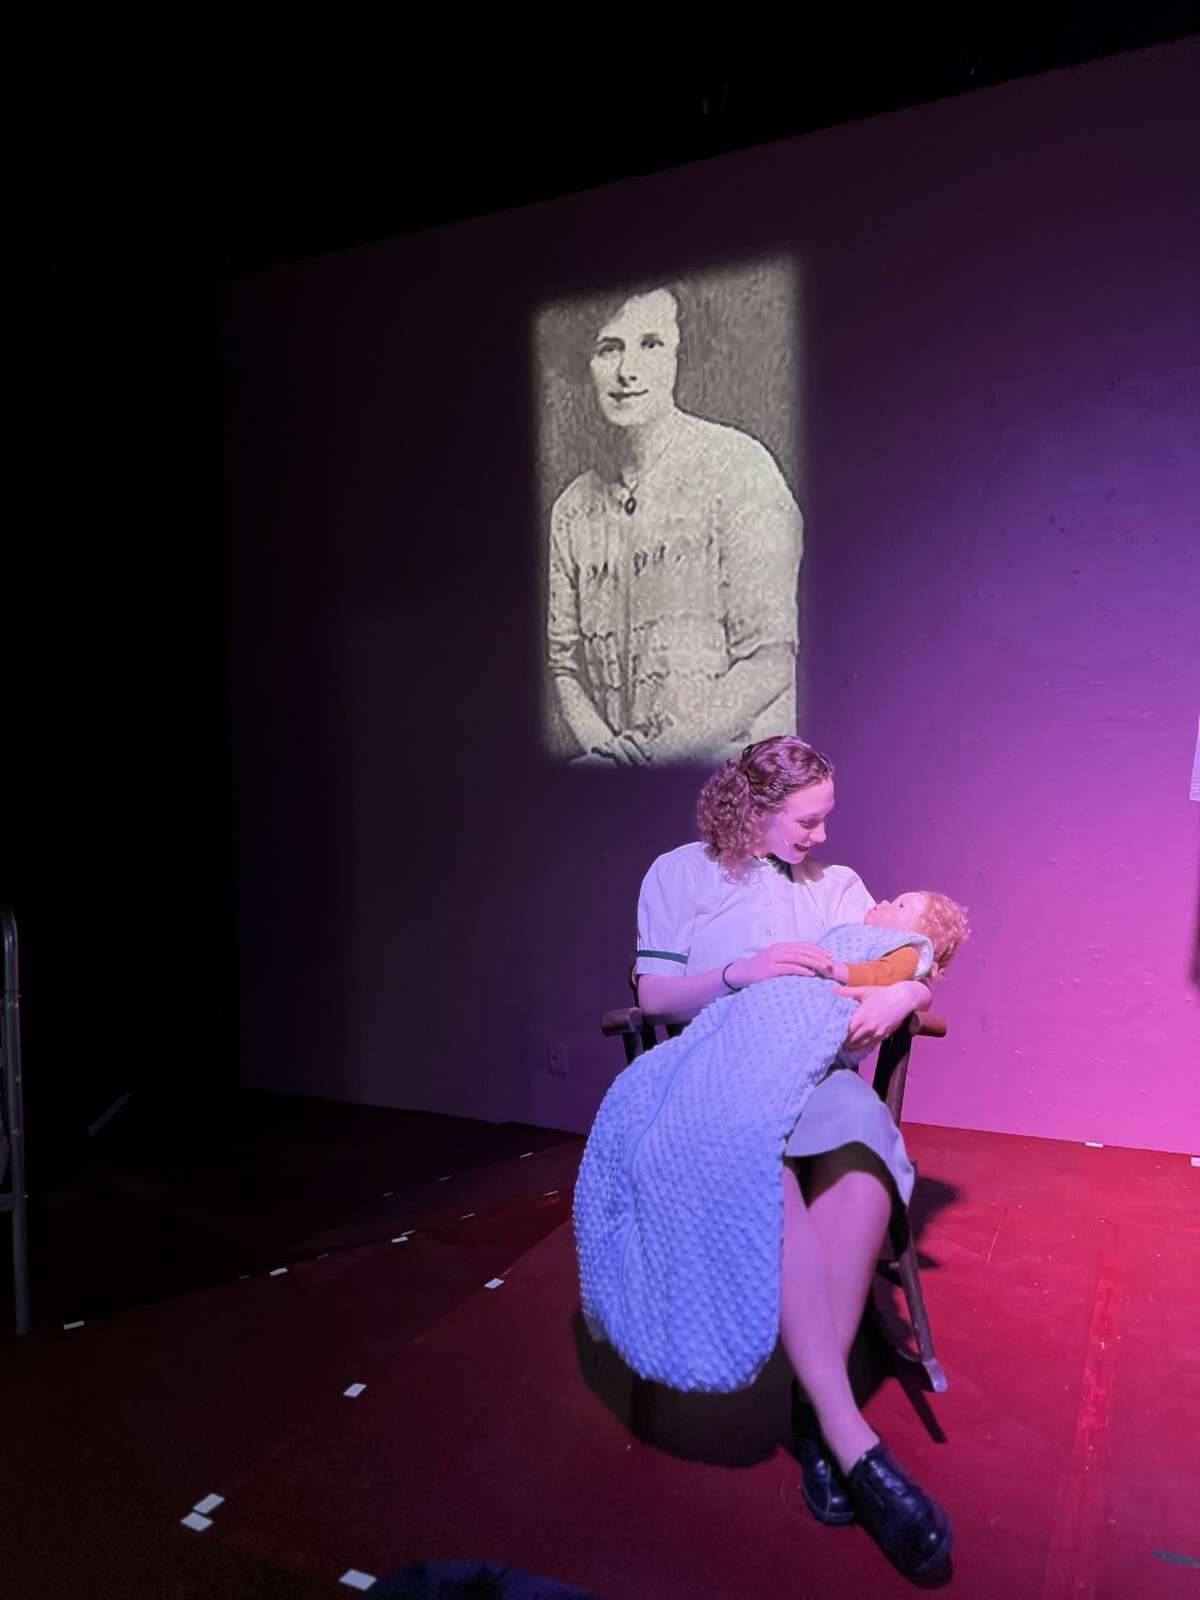 The Alton Little Theater showplace will debut their production of Violet Sharp at 7:30 p.m. Friday, March 3.